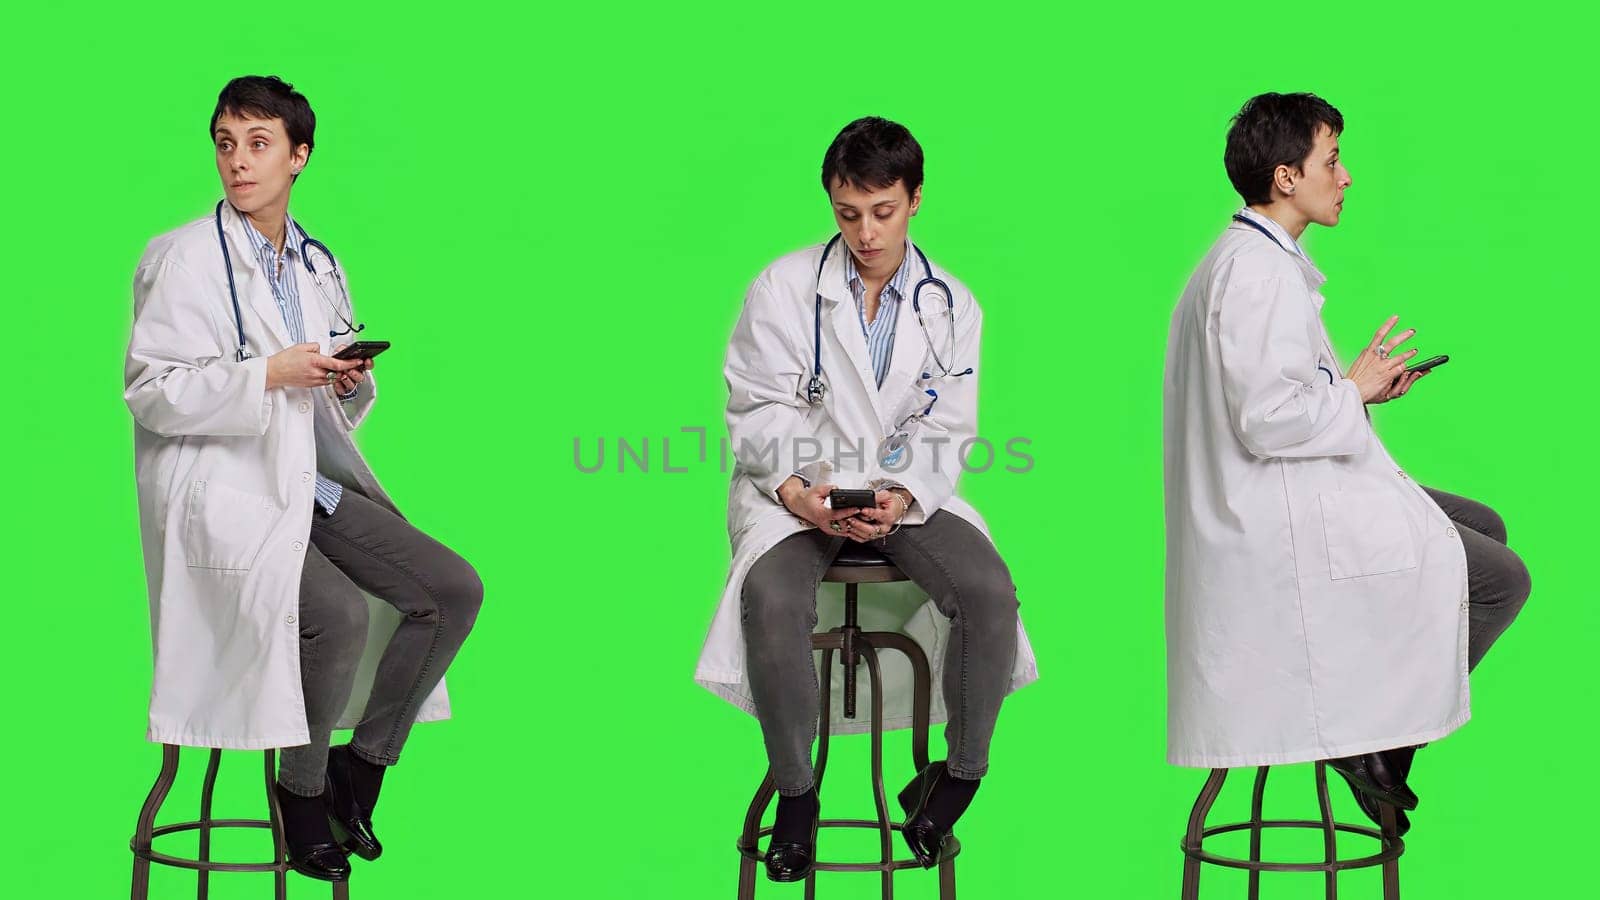 Woman specialist using smartphone social media apps in studio, sitting on a chair against greenscreen backdrop. Physician waiting for someone and browses online webpages, texting. Camera A.